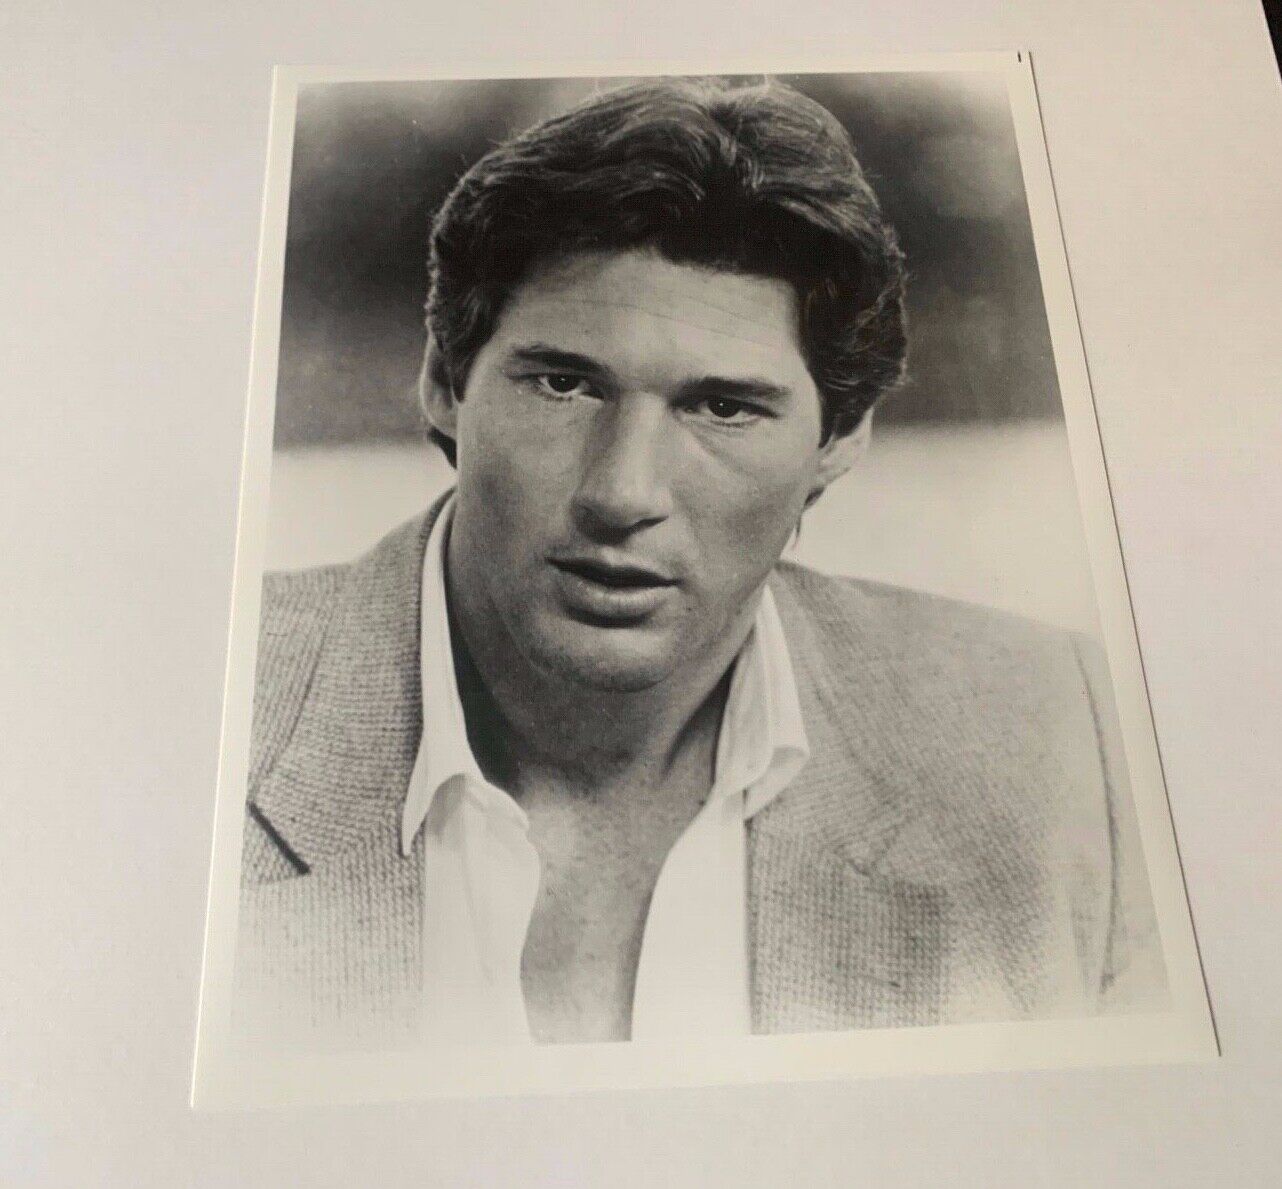 Richard Gere Unsigned Vintage Publicity 8x10 Black and White Celebrity Photo